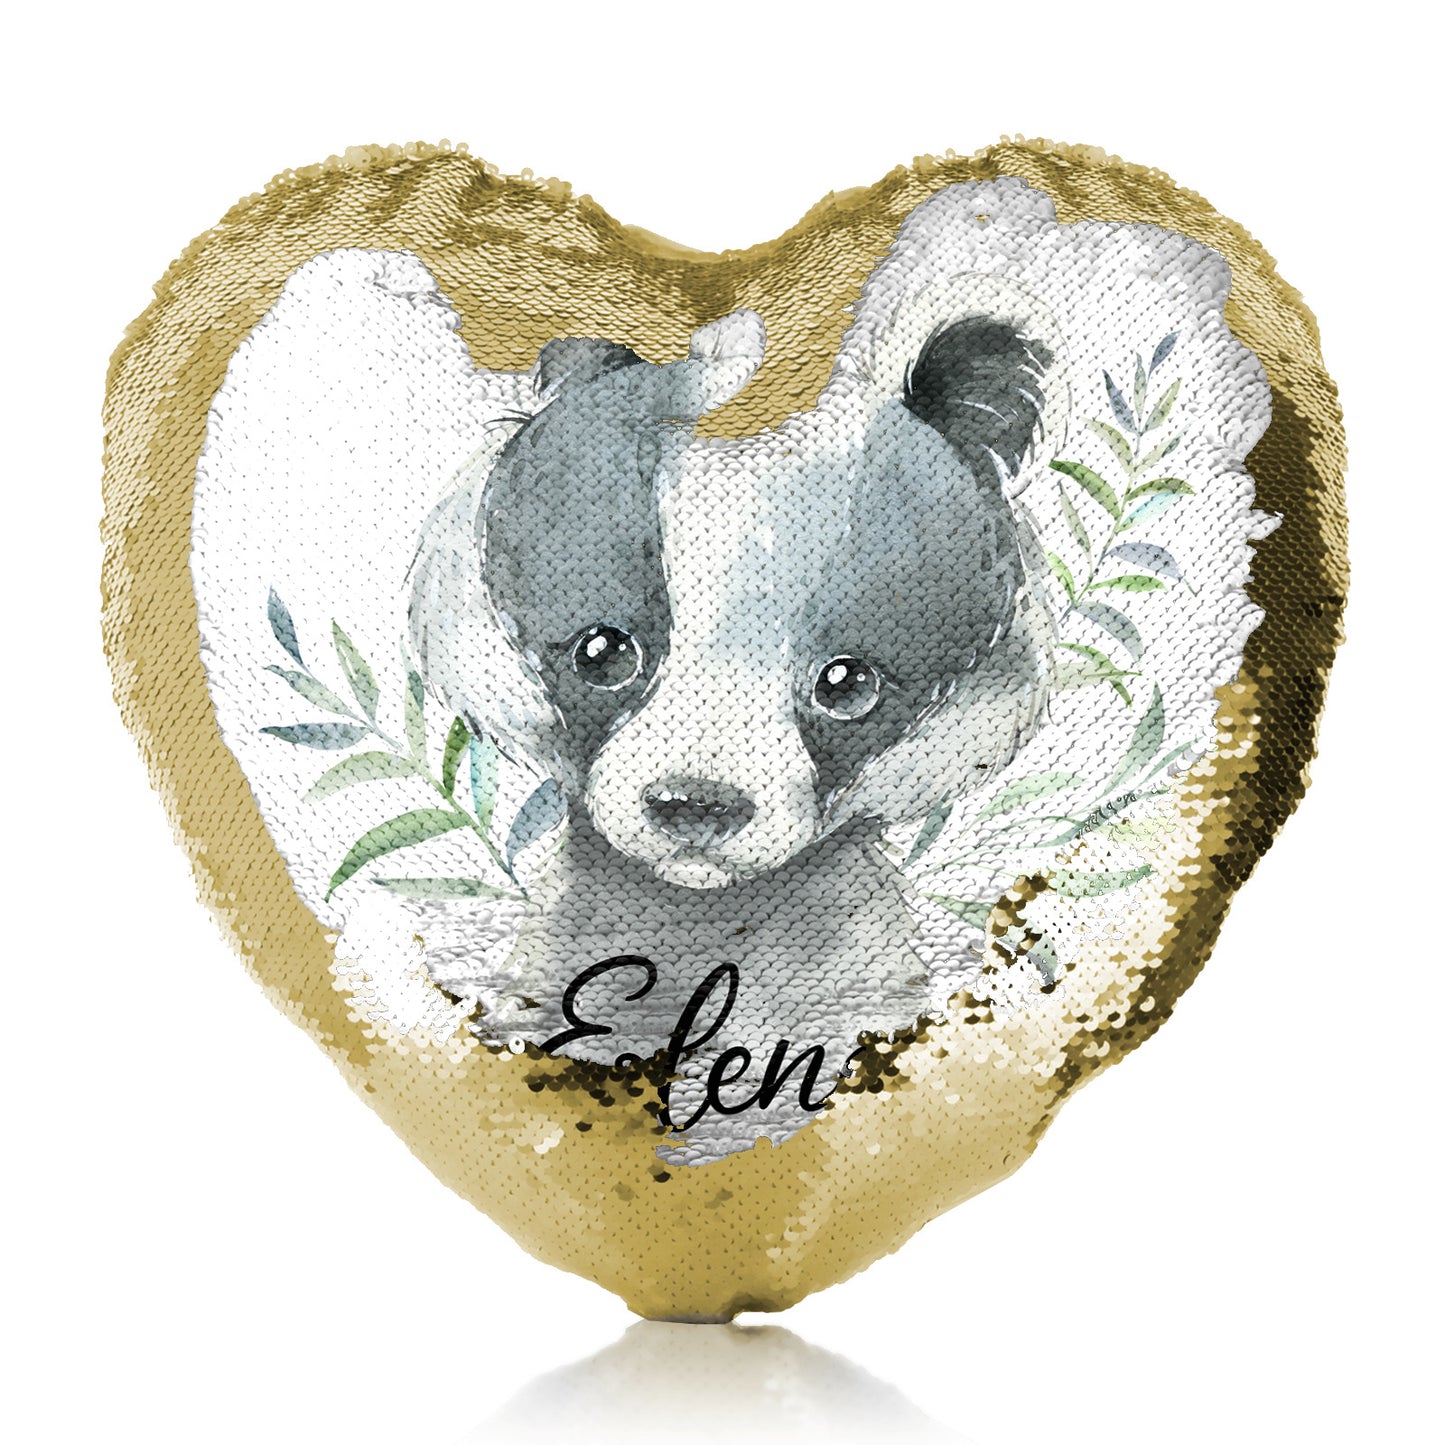 Personalised Sequin Heart Cushion with Black and White Badger Leaves and Cute Text